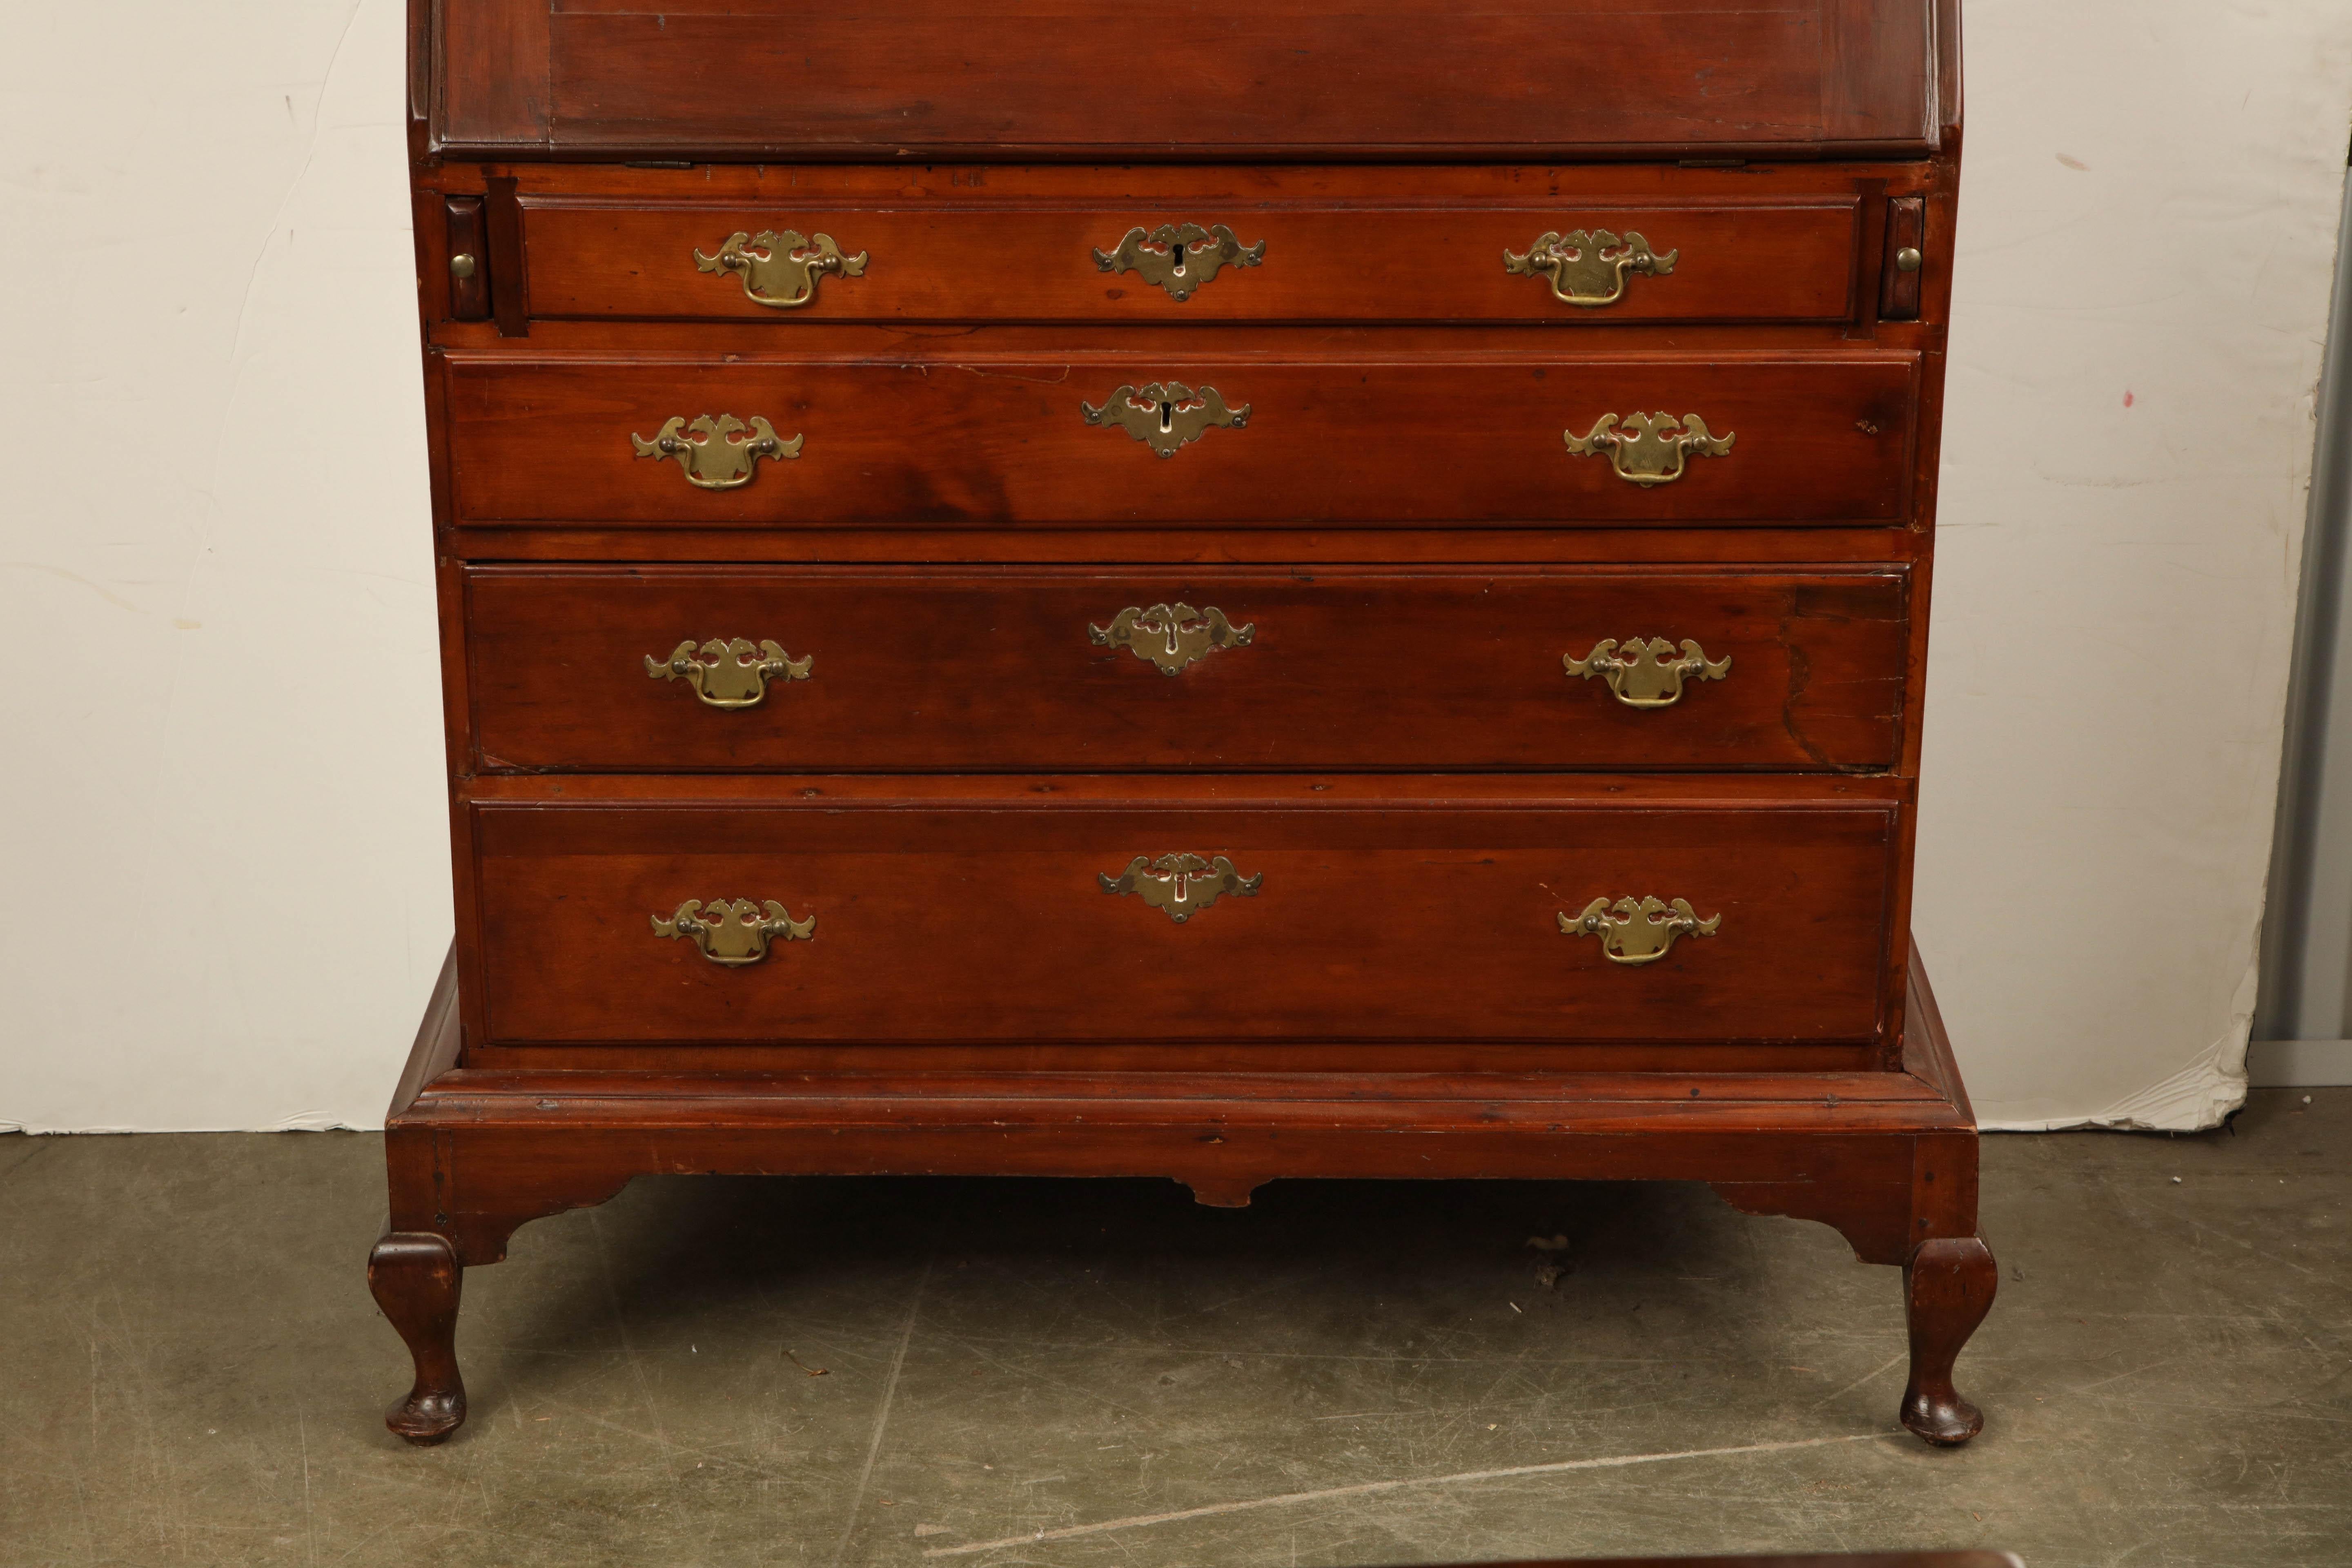 A rare American Queen Anne maple slant front desk on separate frame with blocked interior.